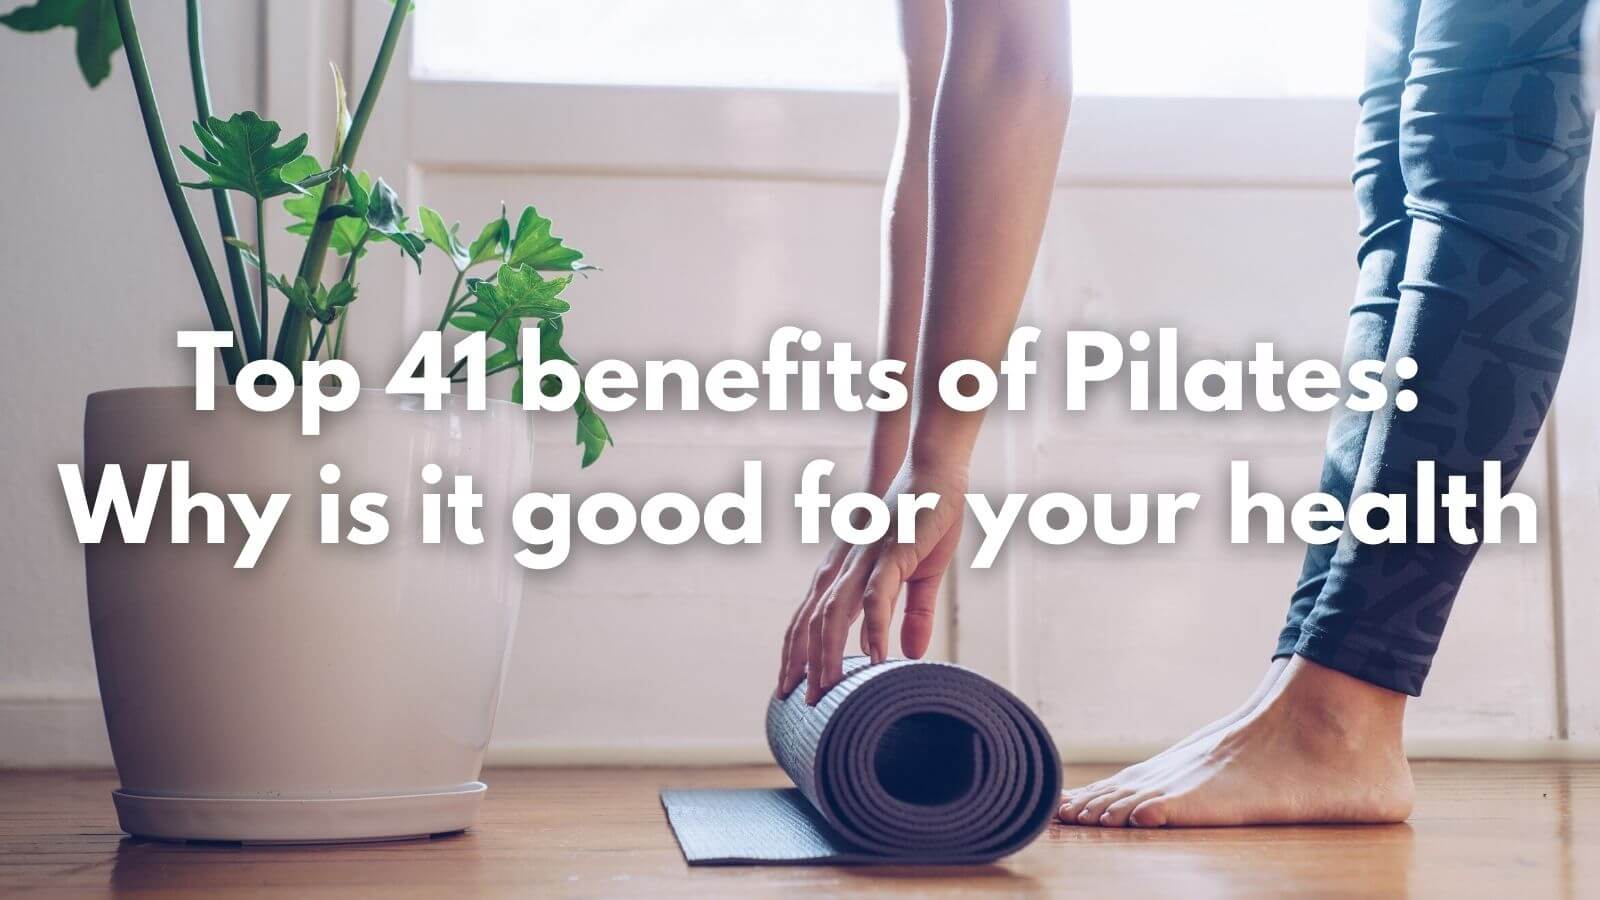 15 min Everyday Pilates: The Secret to Maintaining Your Health & Wellness 